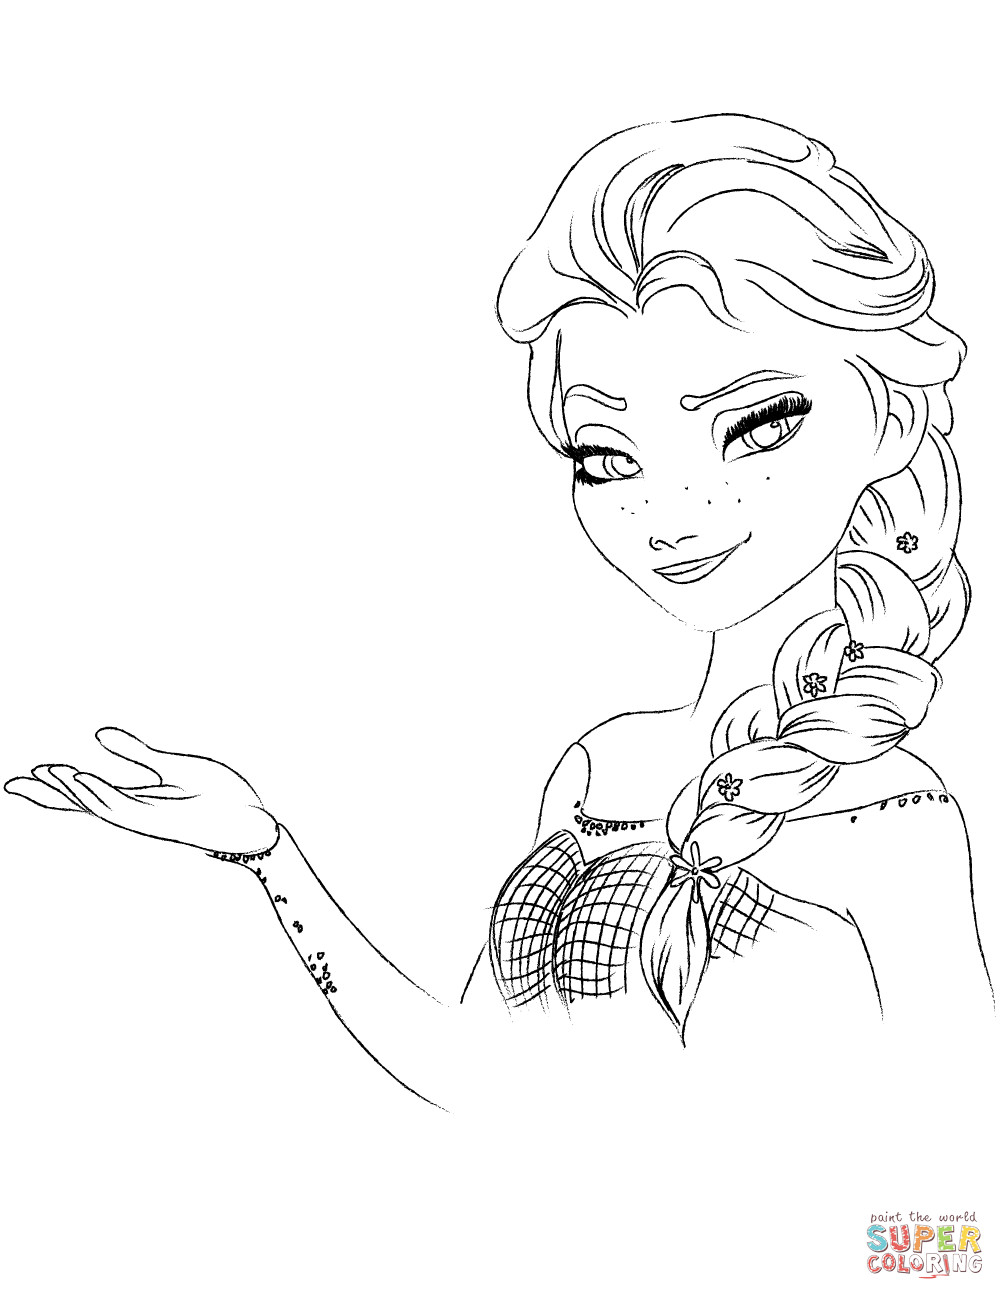 Free Elsa Coloring Pages
 Elsa from The Frozen coloring page